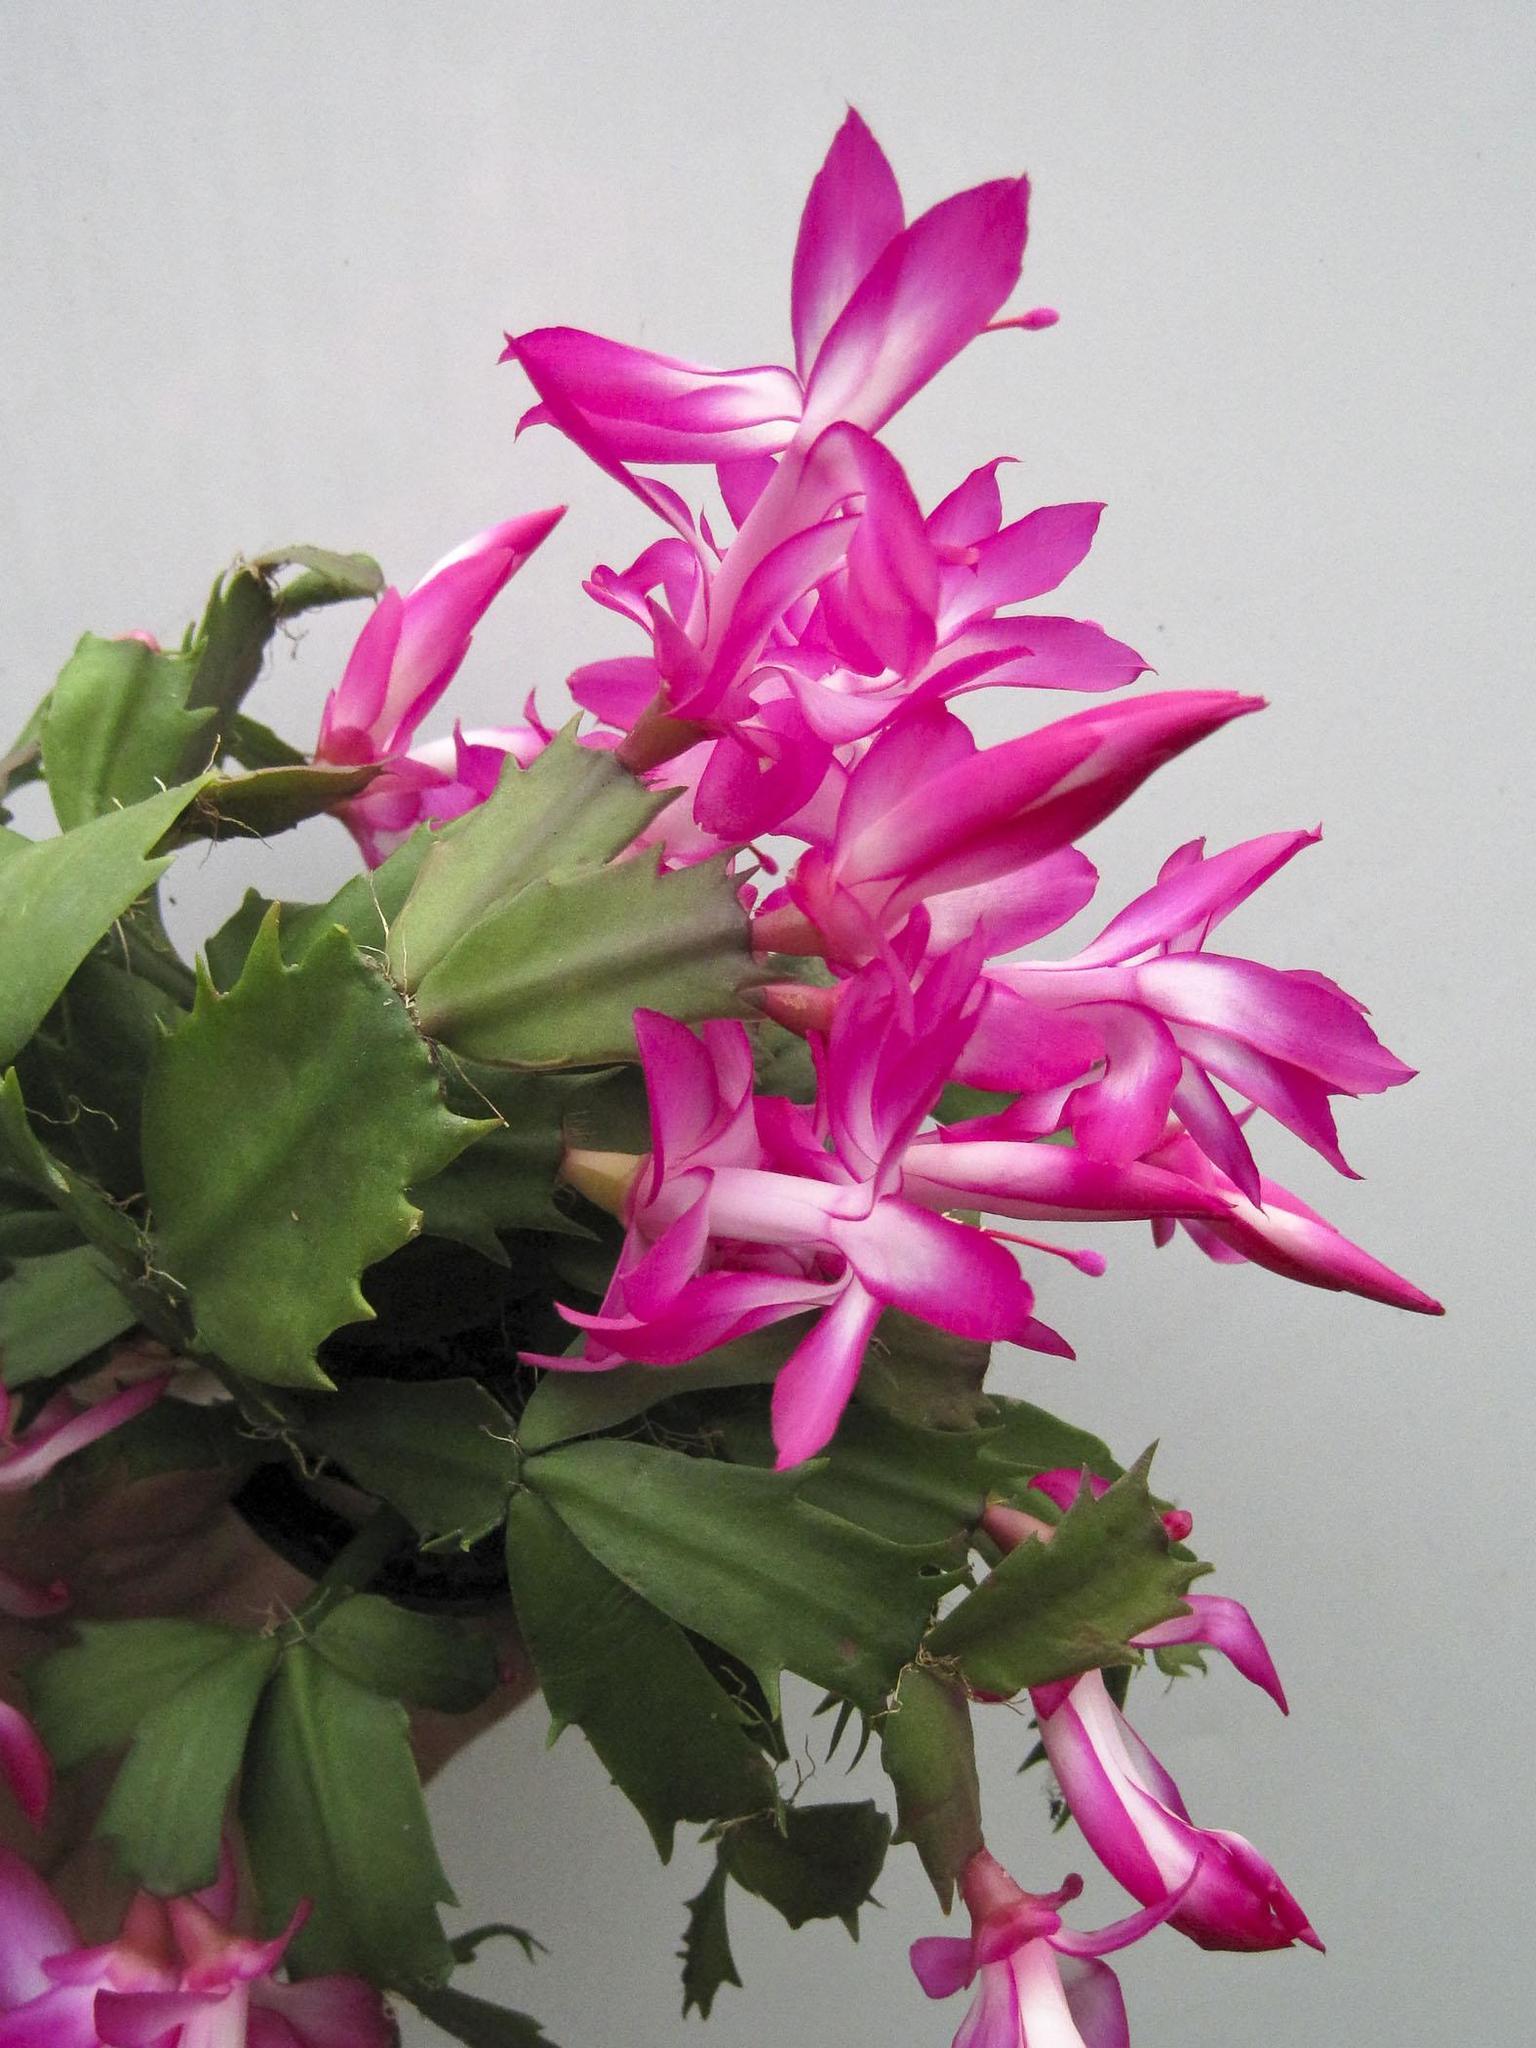 Gardening Tips for taking care of a Christmas cactus   The Morning Call